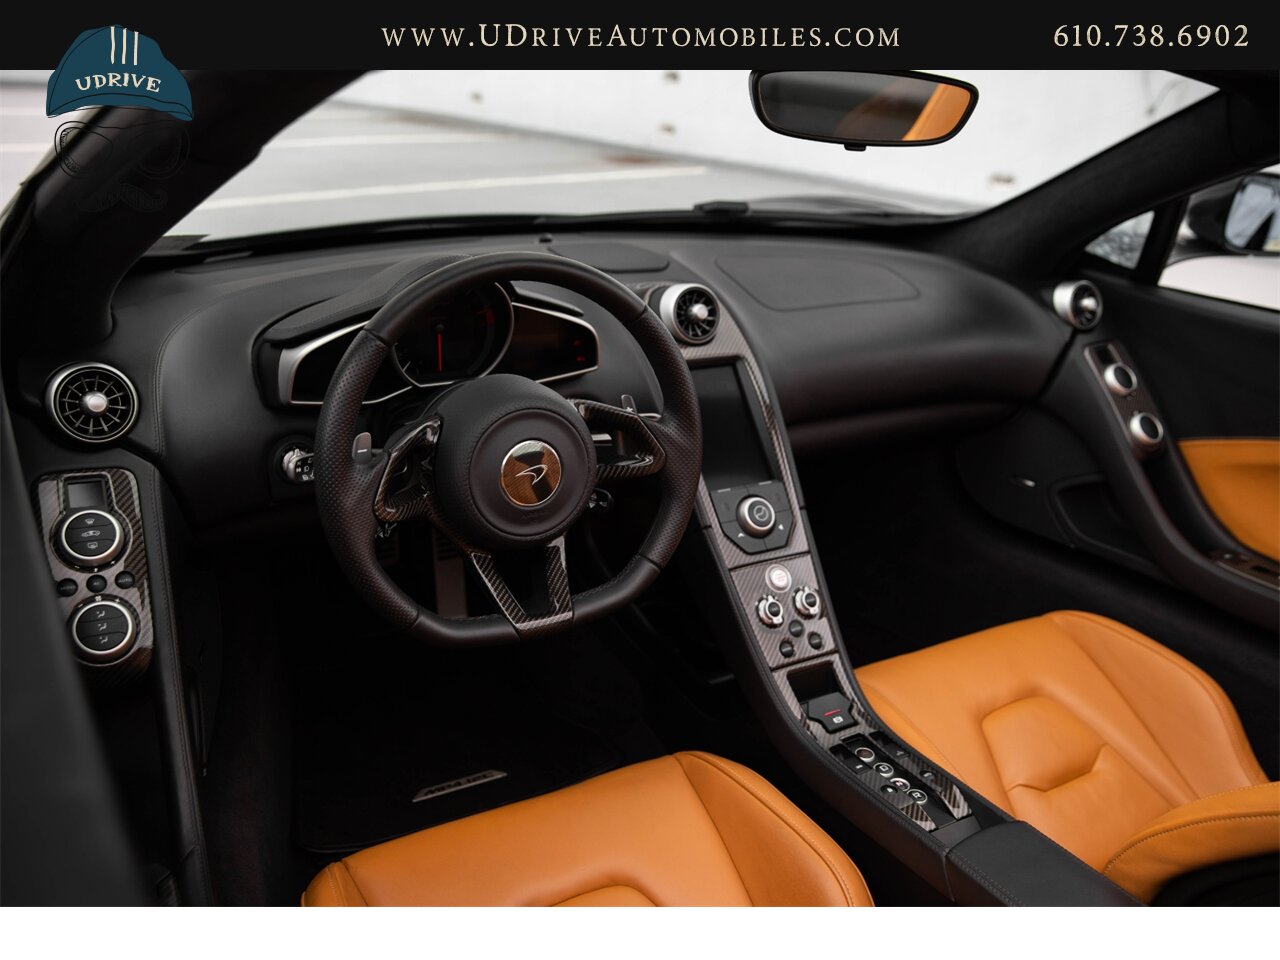 2013 McLaren MP4-12C Spider 1 Owner 6k Miles Carbon Fiber Full Leather  Sapphire Black over Natural Tan Leather - Photo 34 - West Chester, PA 19382